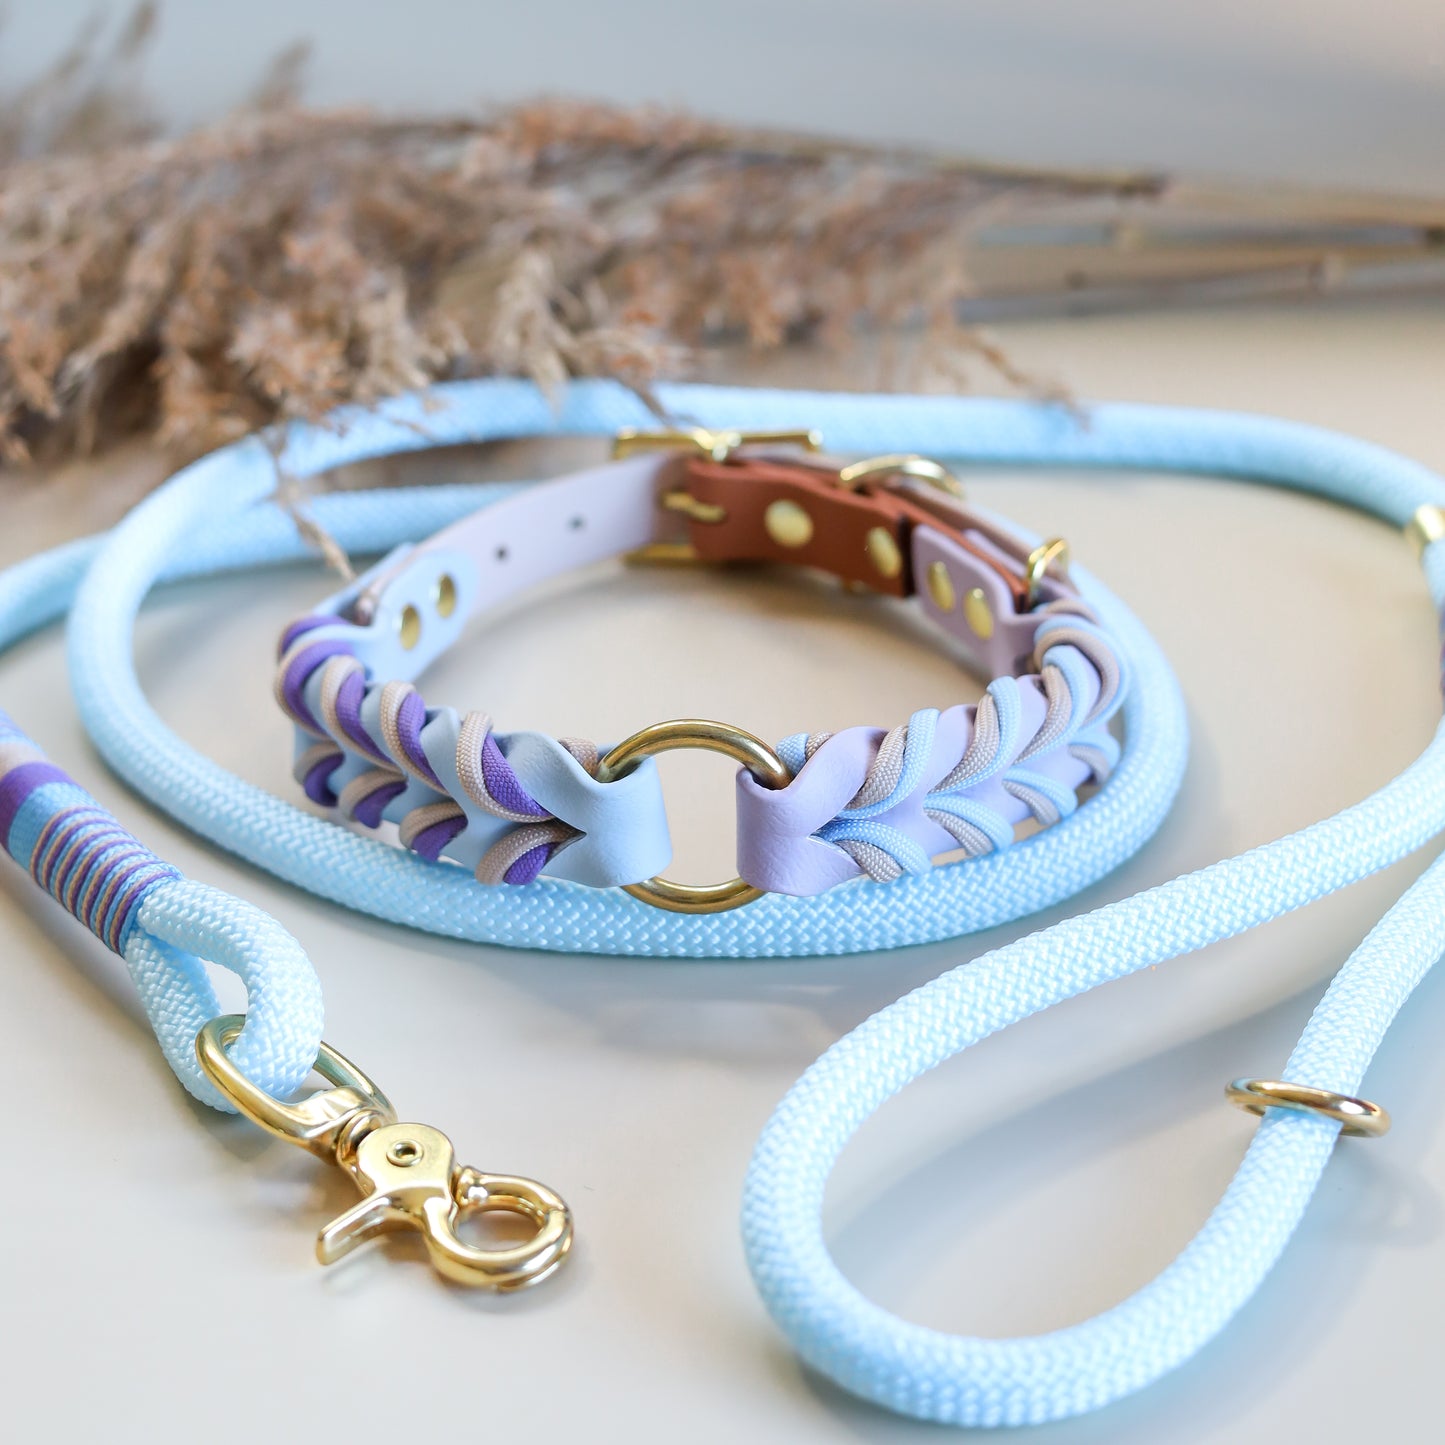 Dusk braided collar with O ring